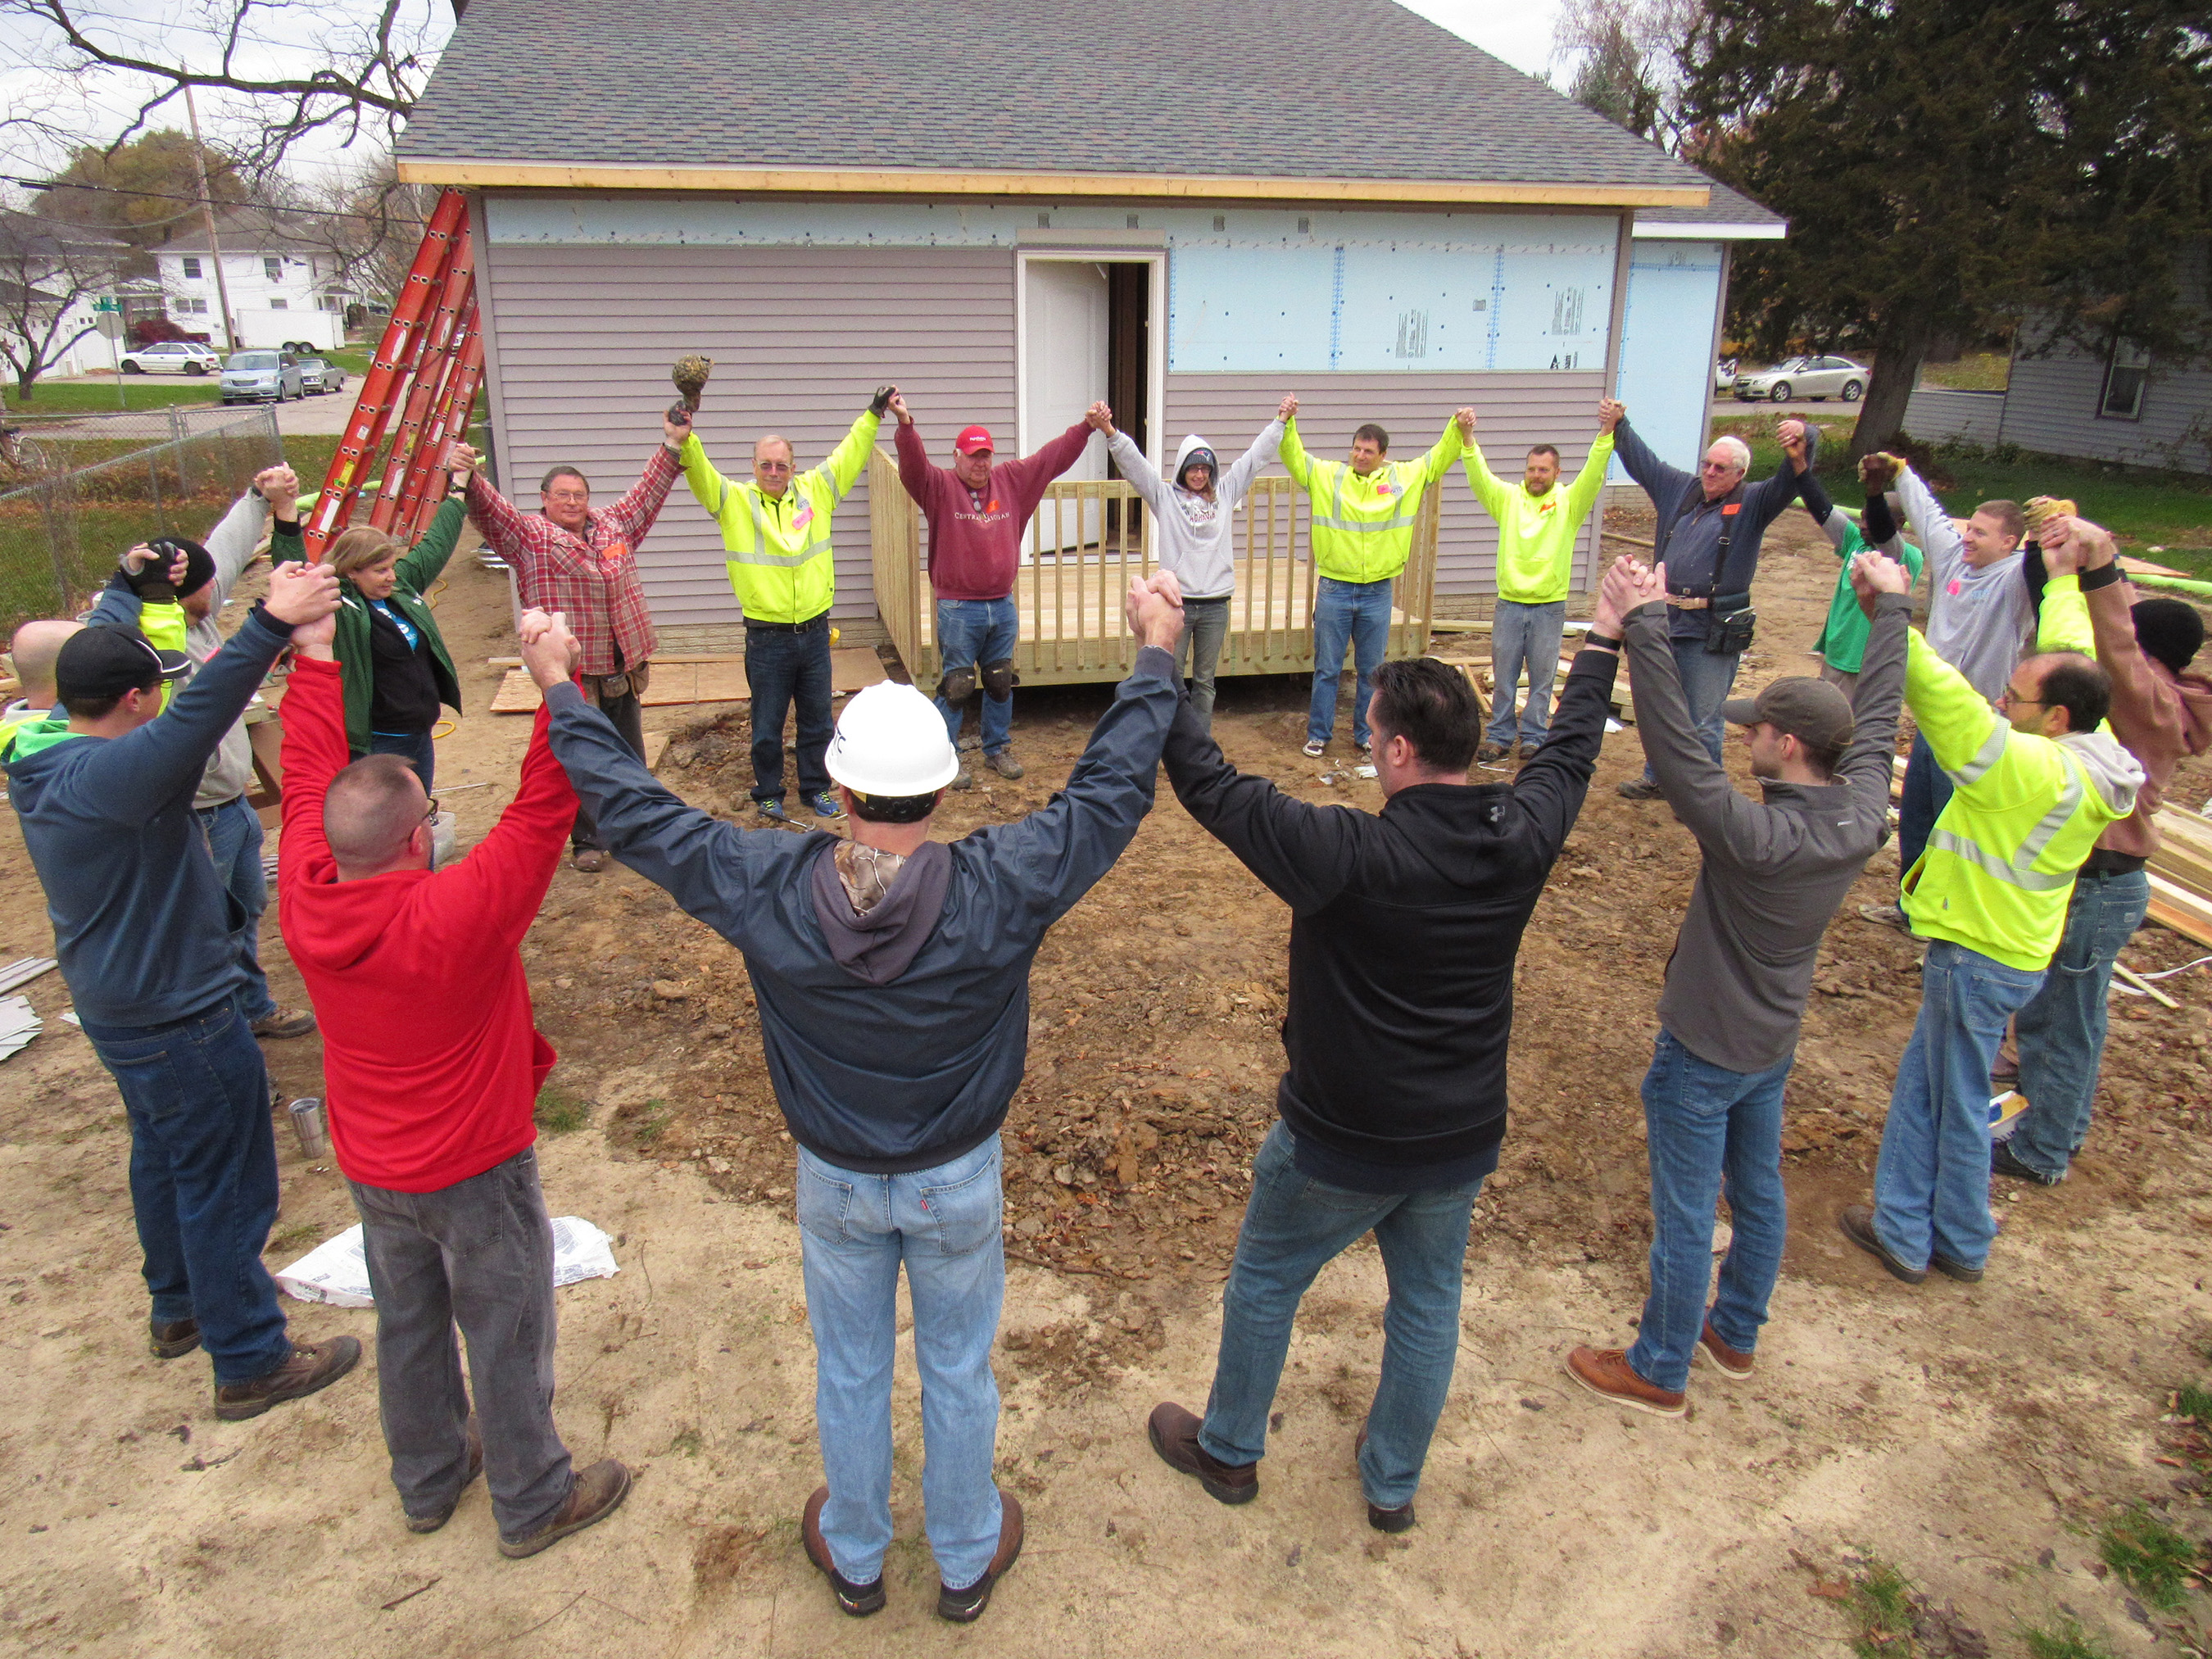 ITC employees have volunteered with Cedar Valley Habitat for Humanity since 2009 to build homes, communities and hope in the greater Cedar Rapids area.